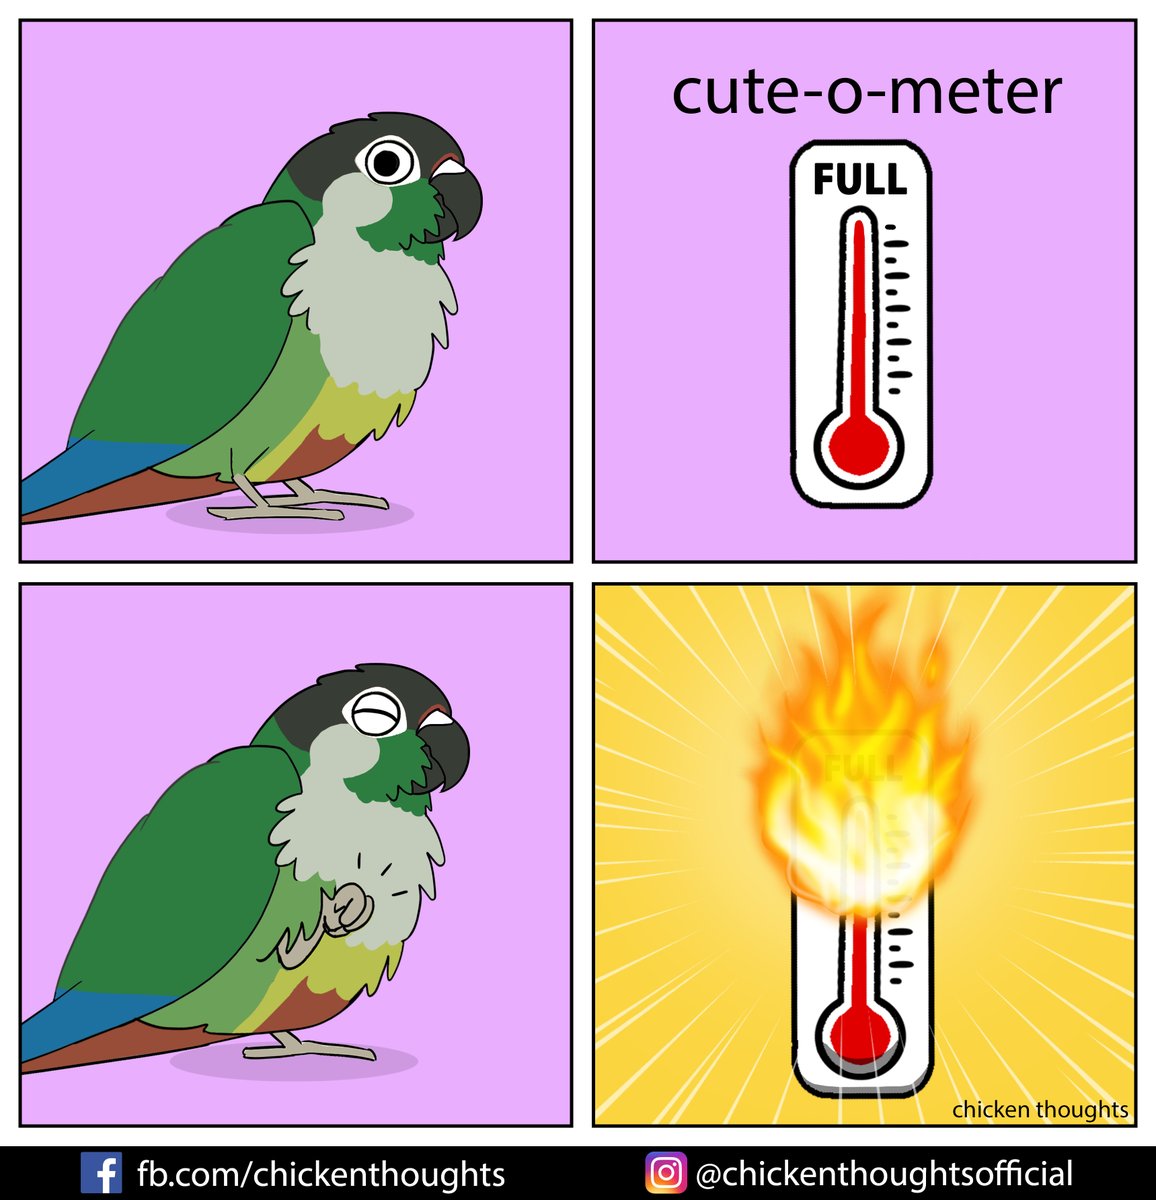 Featuring Patrick and Nicolette's conure Petrie!